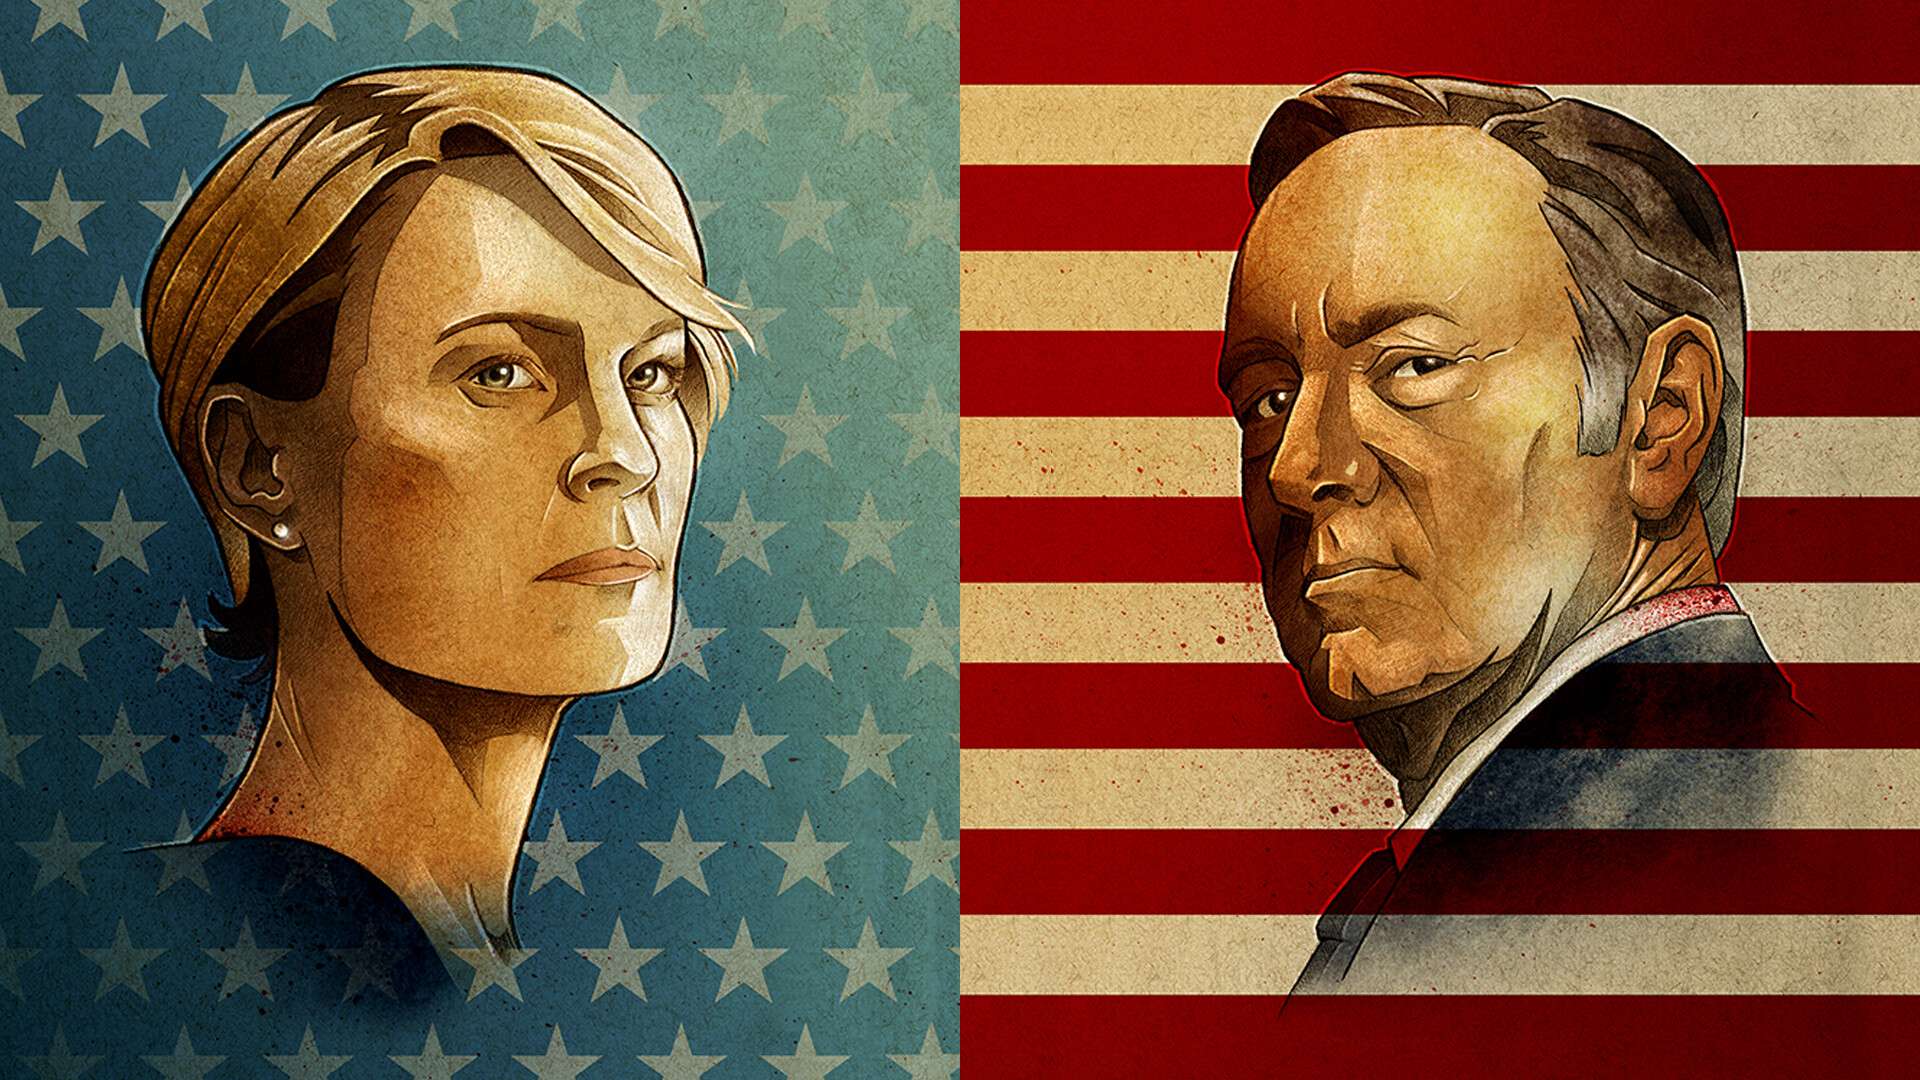 House of Cards: The series tells the story of Frank Underwood and his equally ambitious wife Claire Underwood. 1920x1080 Full HD Background.